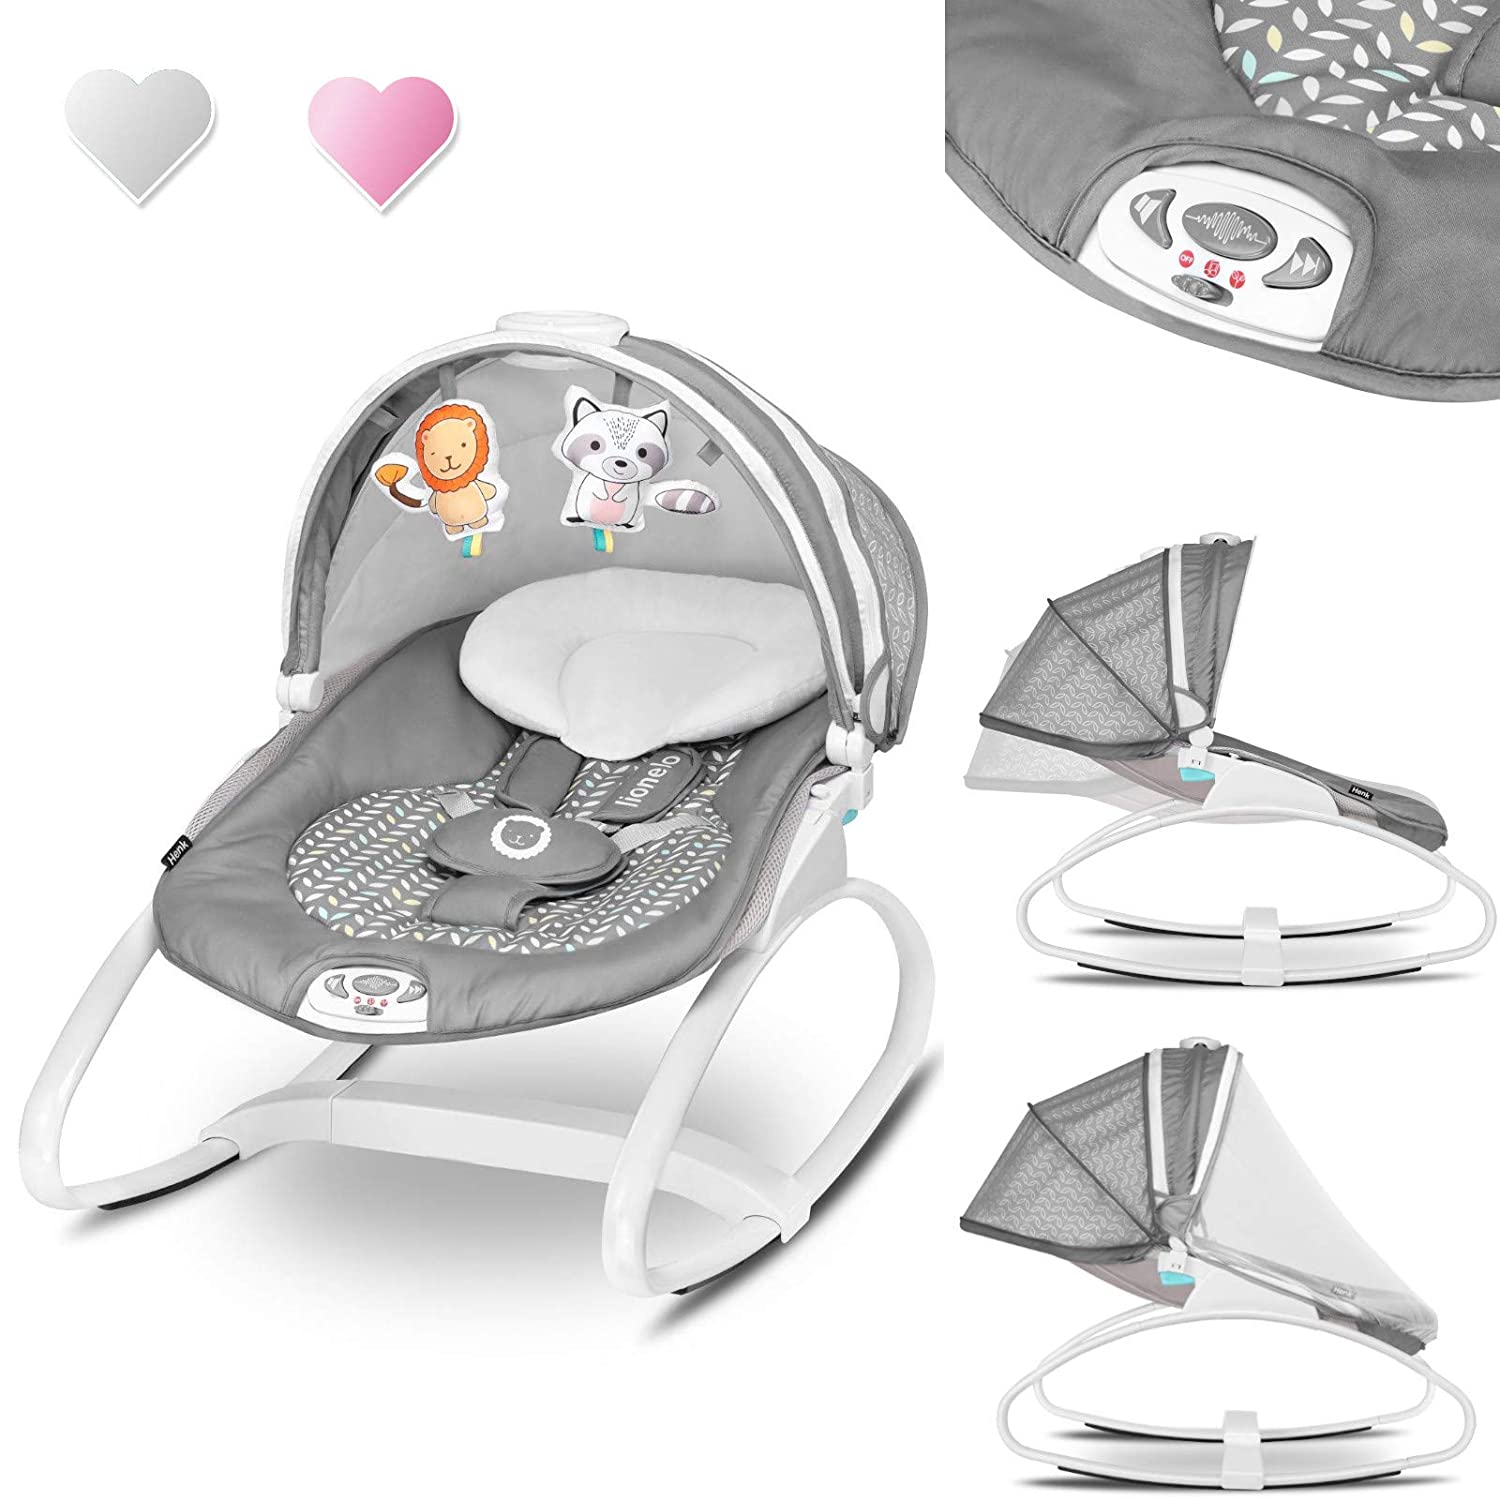 Lionelo Henk Baby Rocker Electric with Reclining Function, Baby Swing 0-9 kg, 5 Melodies, Natural Sounds, Mosquito Net, Play Arch (Grey)